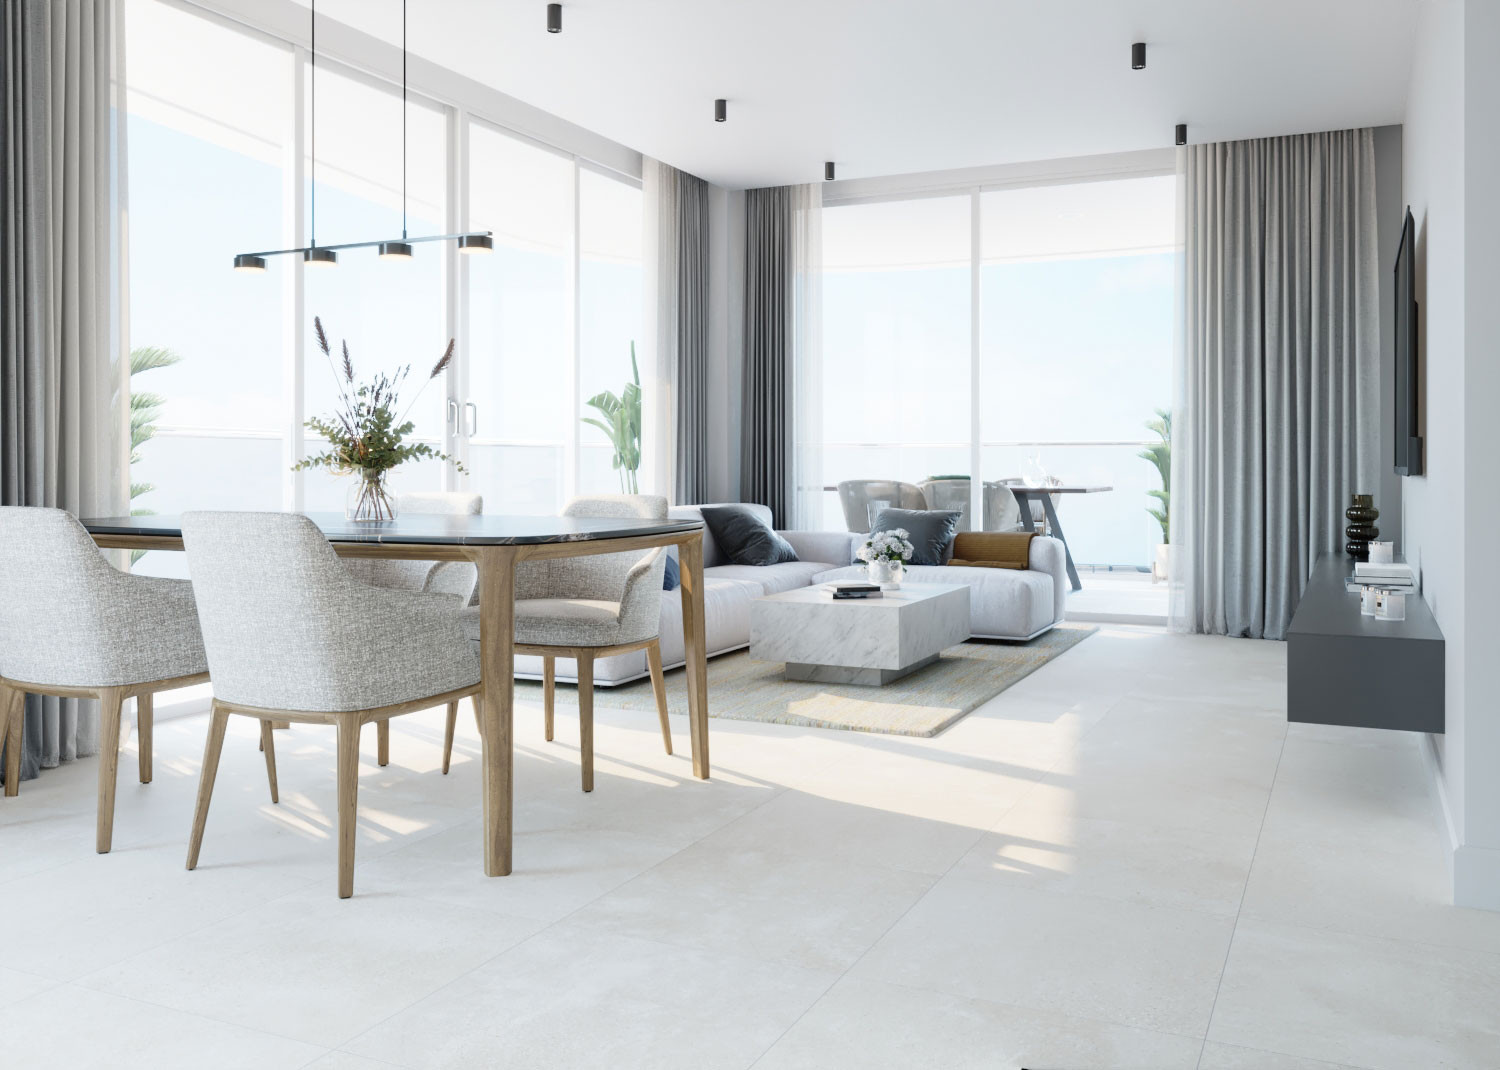 Nova Marina: New residential project of flats and penthouses located in Fuengirola. | Image 4